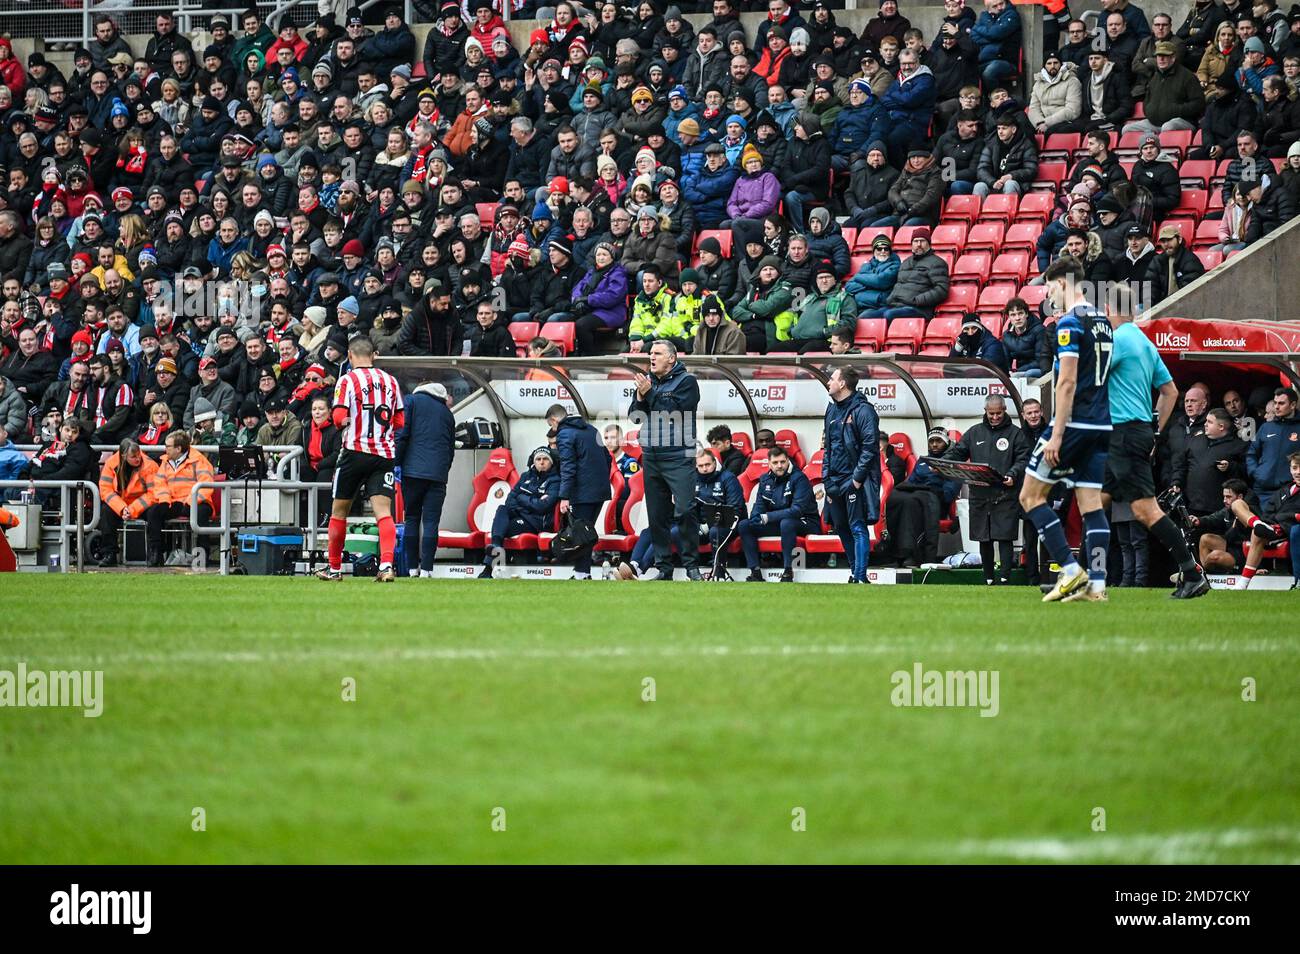 Sunderland AFC manager Tony Mowbray watches on as his side face Middlesbrough in the EFL Championship. Stock Photo